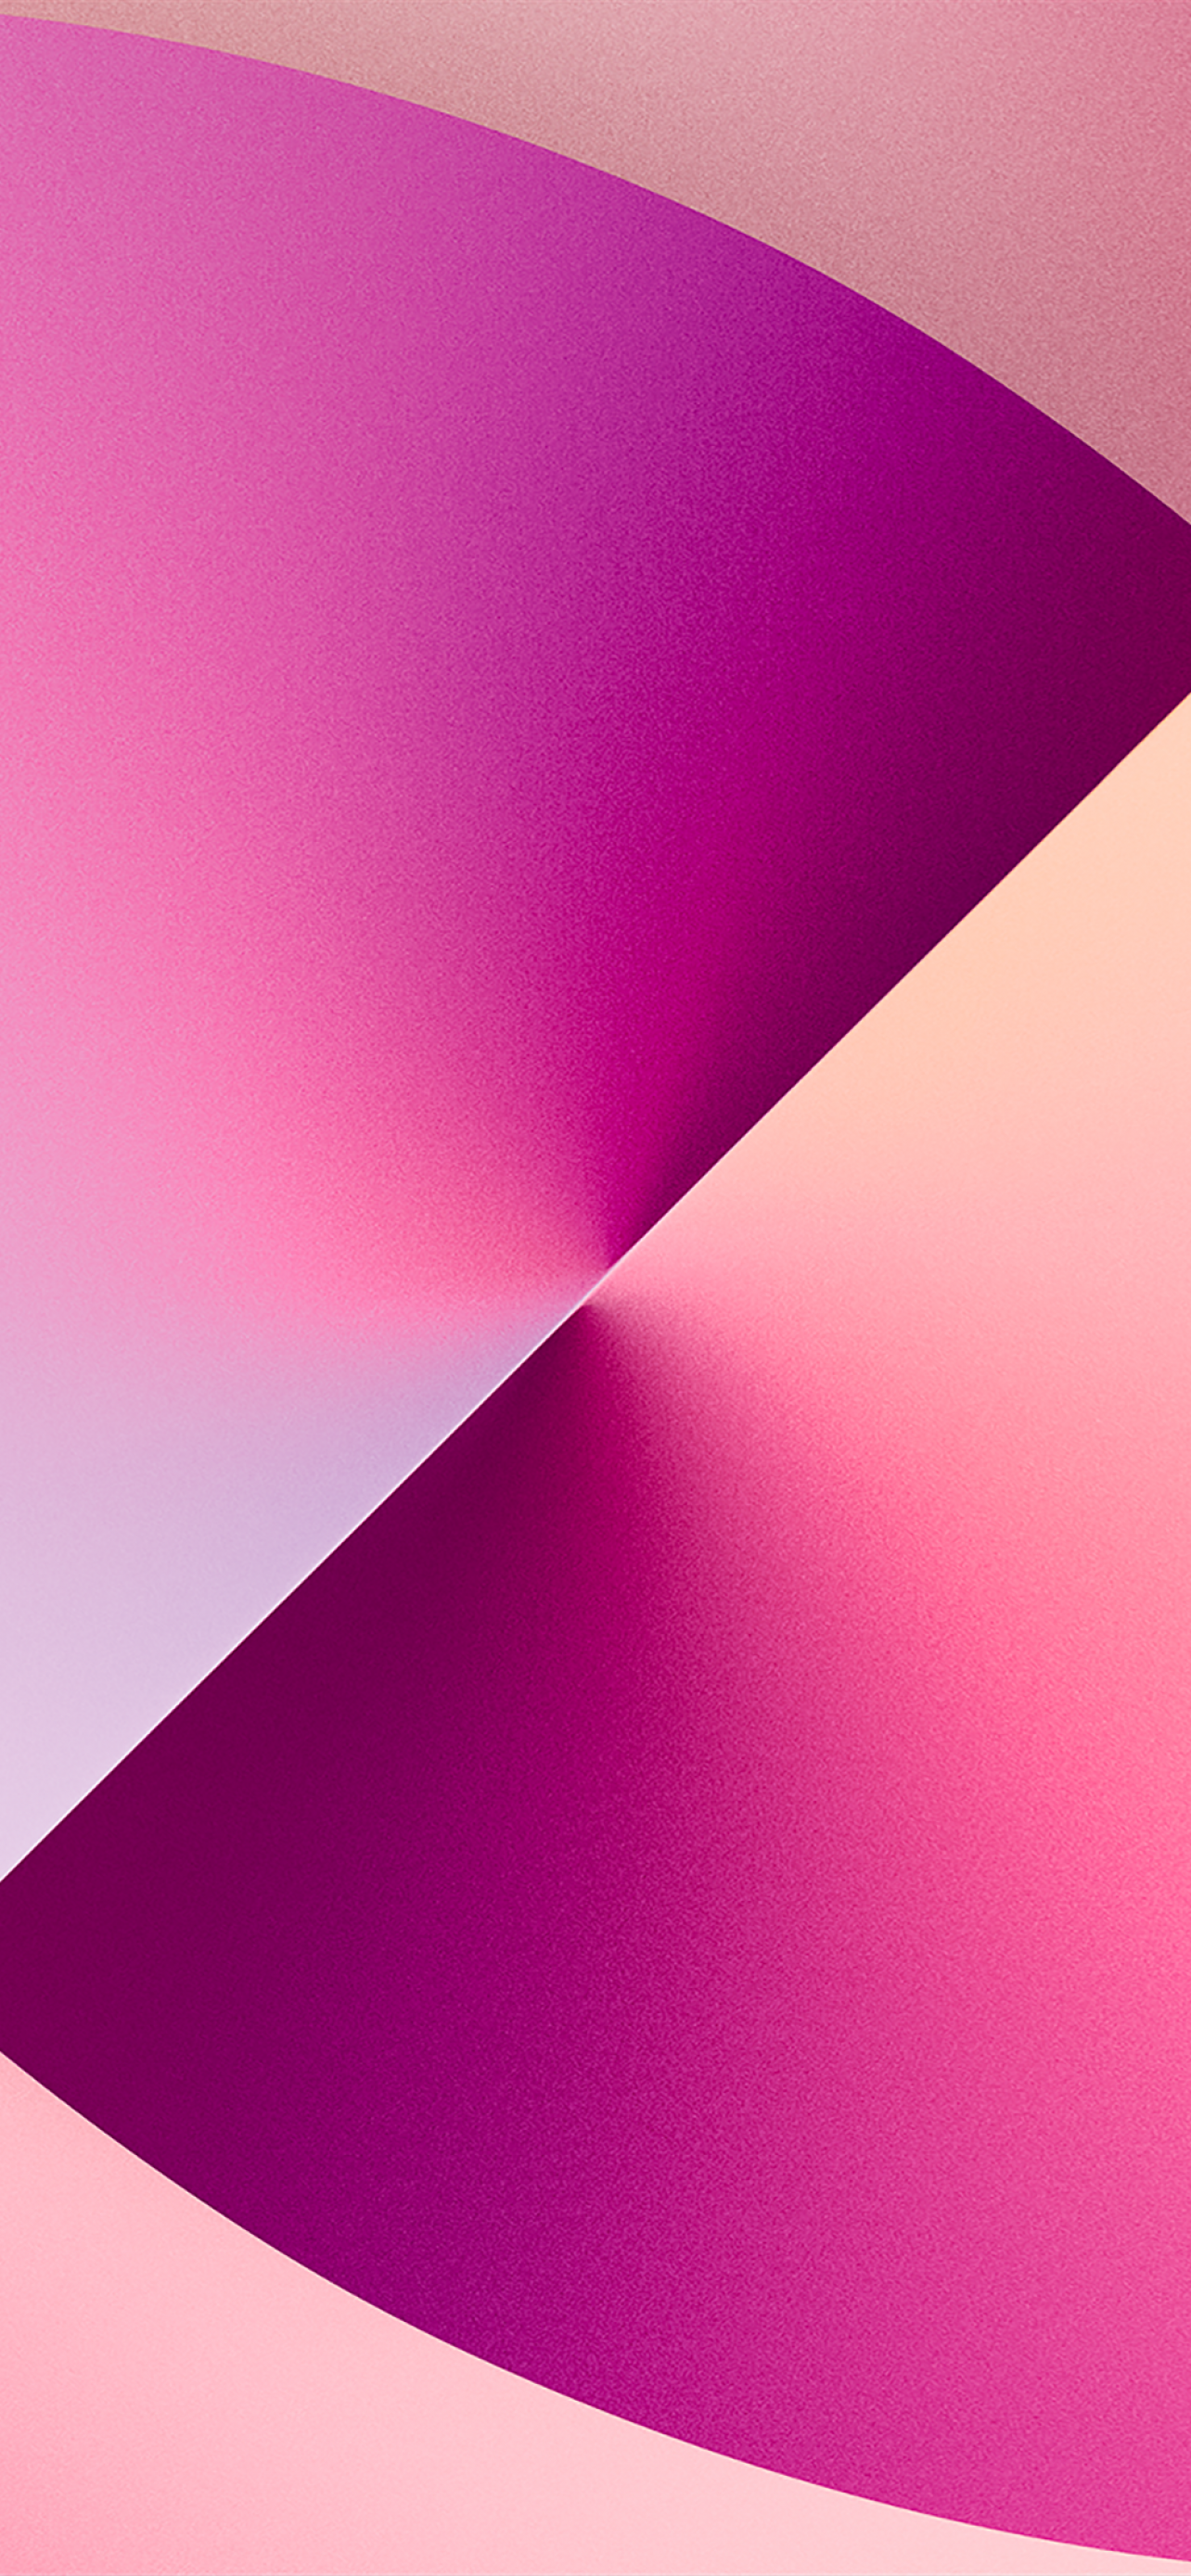 Hot Pink And White Aesthetic top iPhone Wallpapers Free Download